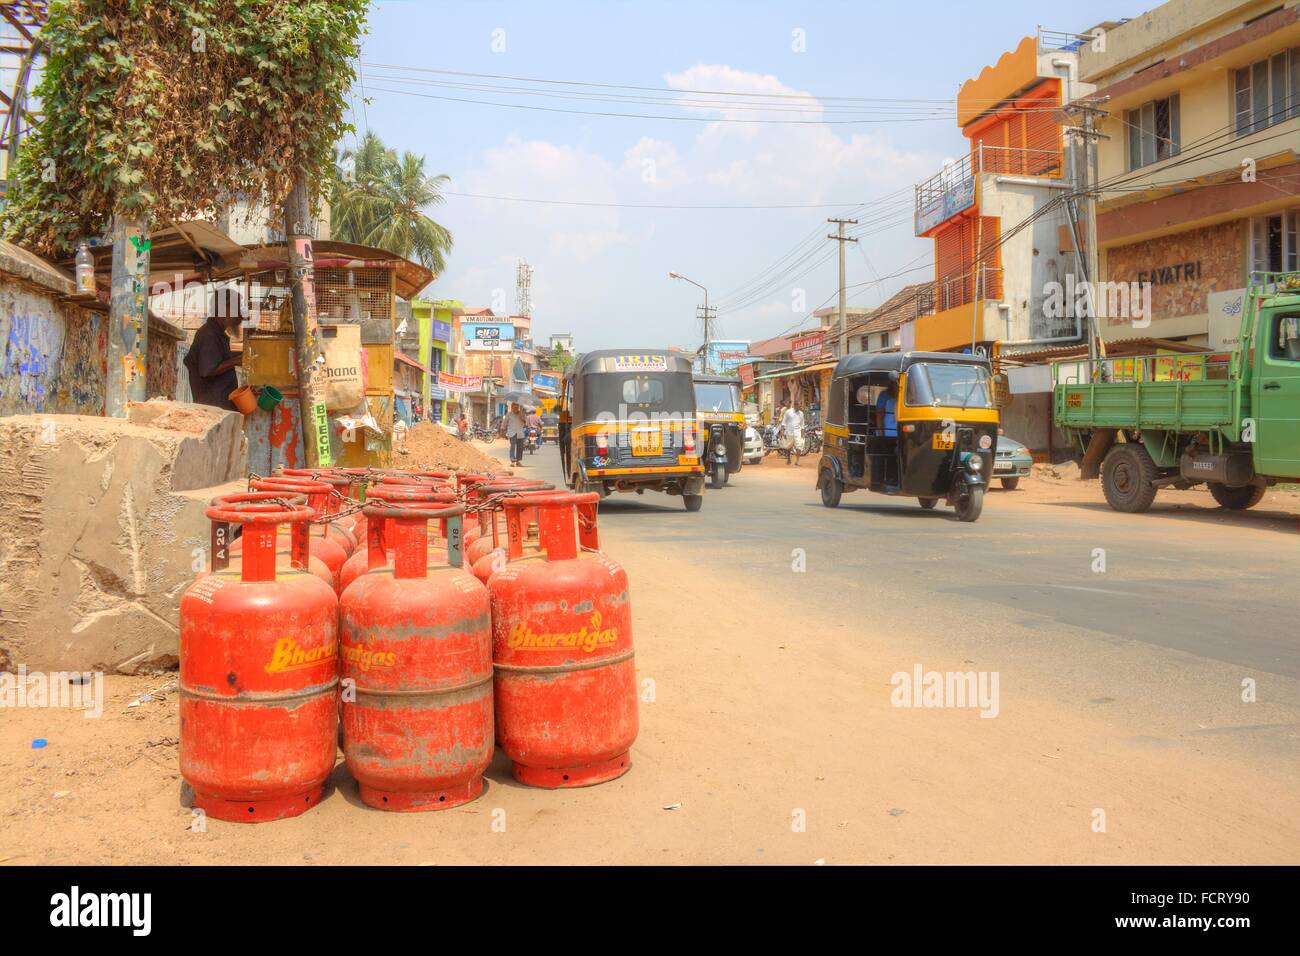 Street Scene with Gas Canisters, Rickshaws, Other Traffic, Trivandrum, Kerala, India Stock Photo